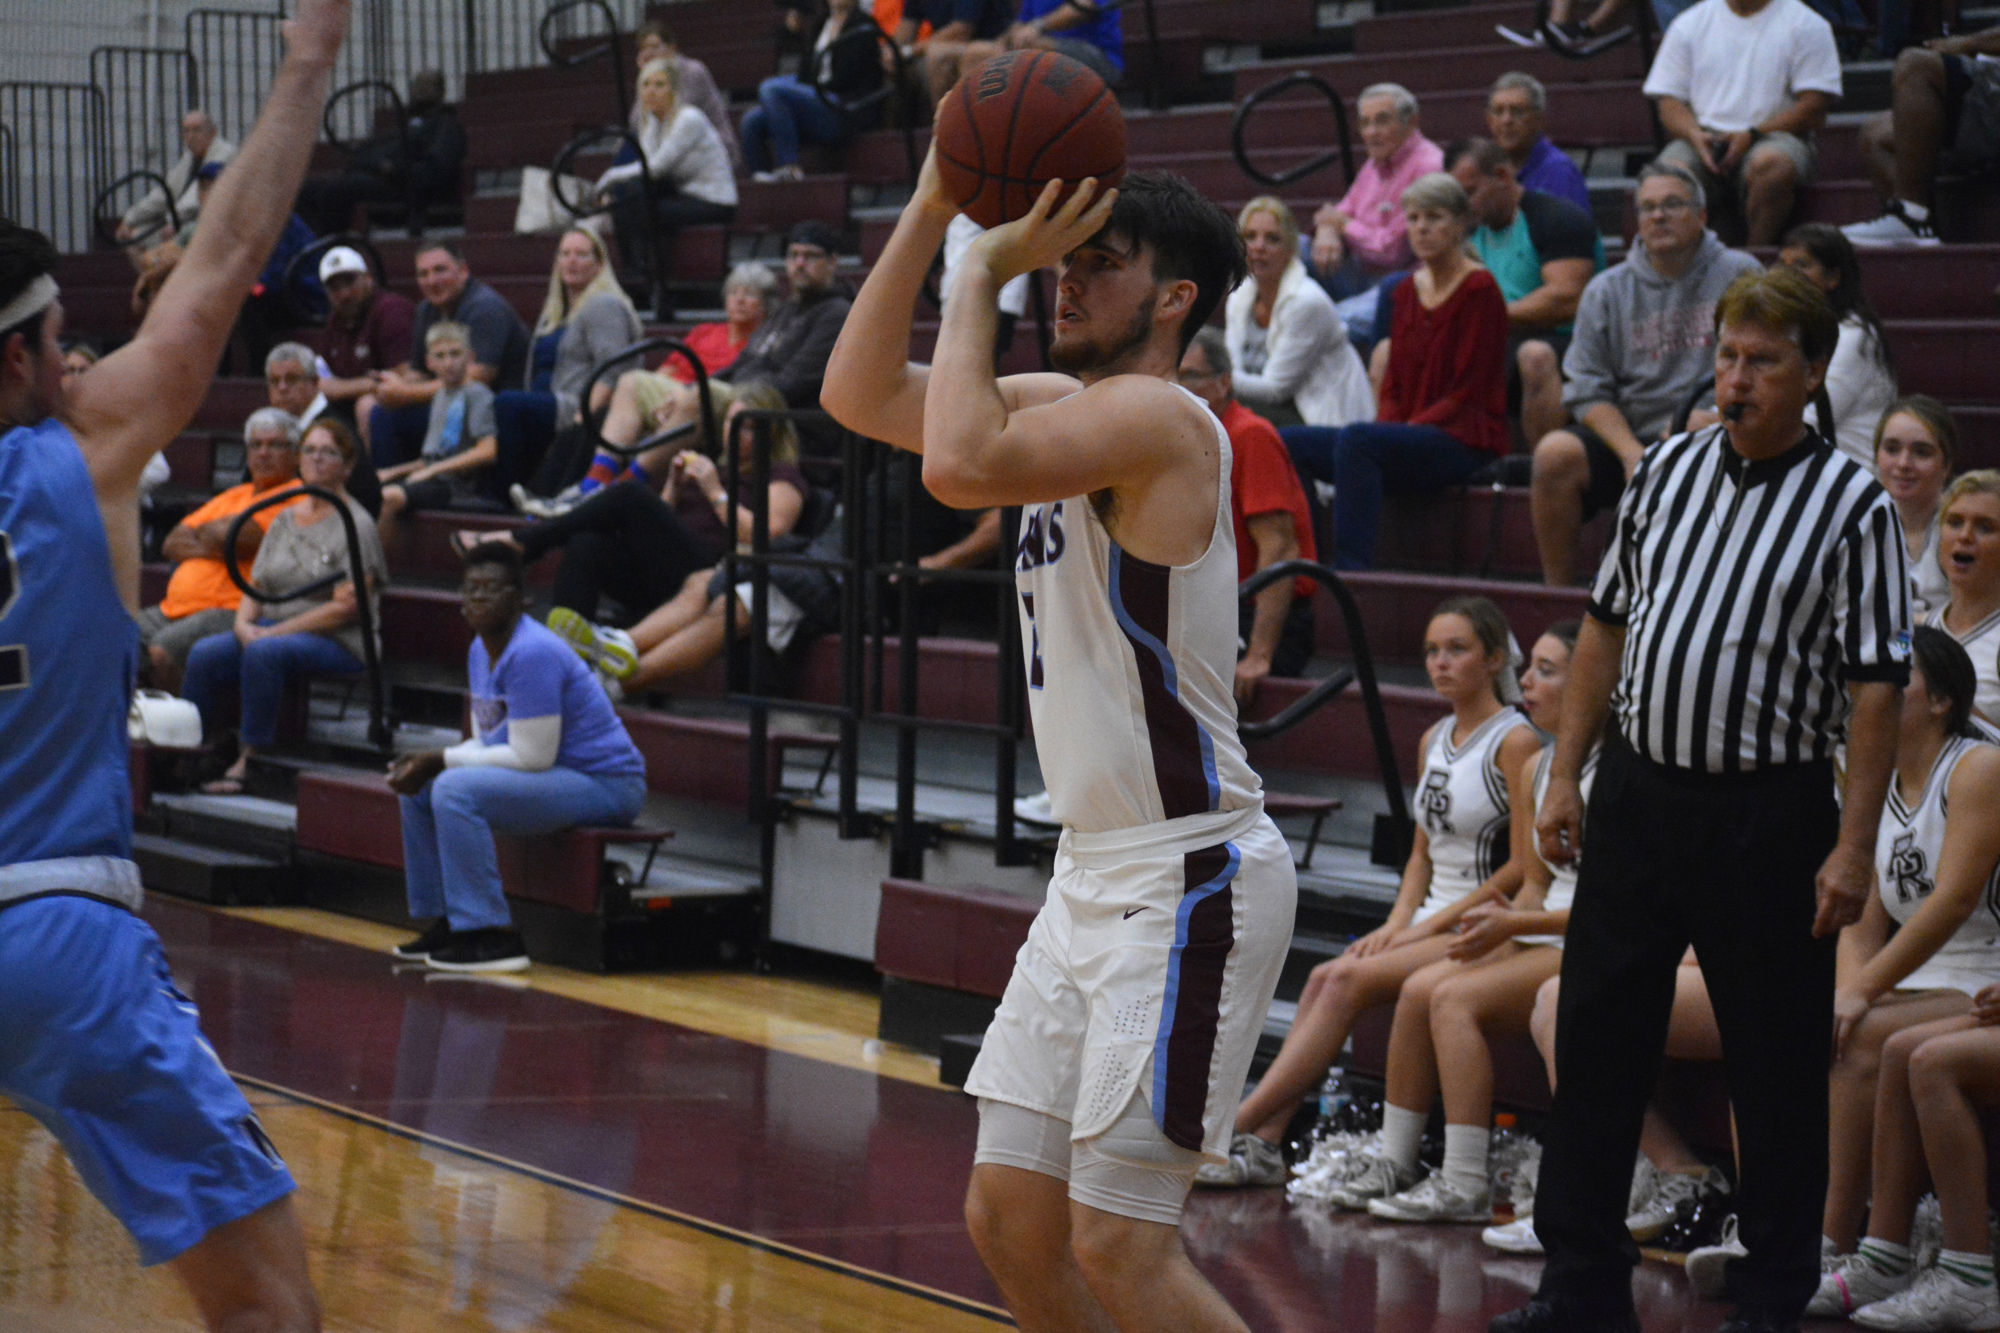 Riverview junior Zach Mobley hit a three-pointer late in the game against Newsome.